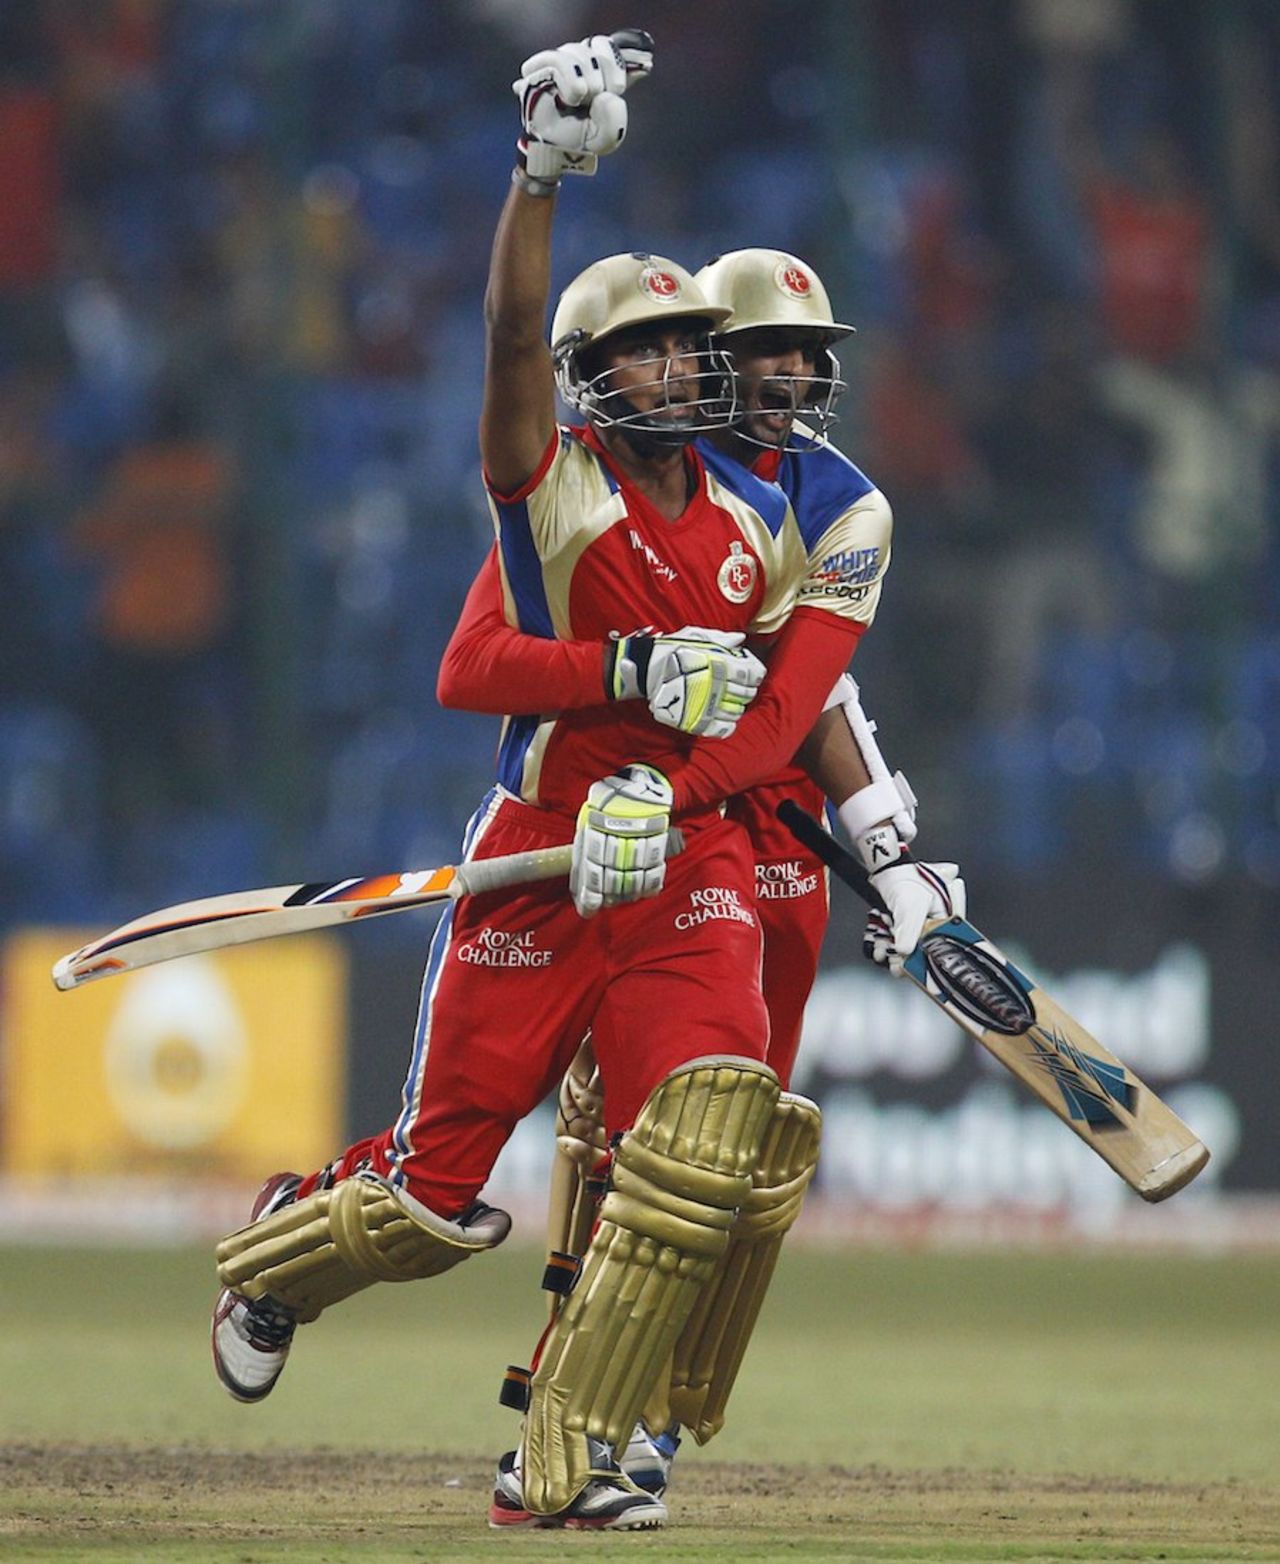 Arun Karthik and S Aravind soak in the victory, Royal Challengers Bangalore v South Australia, Champions League T20, October 5, 2011